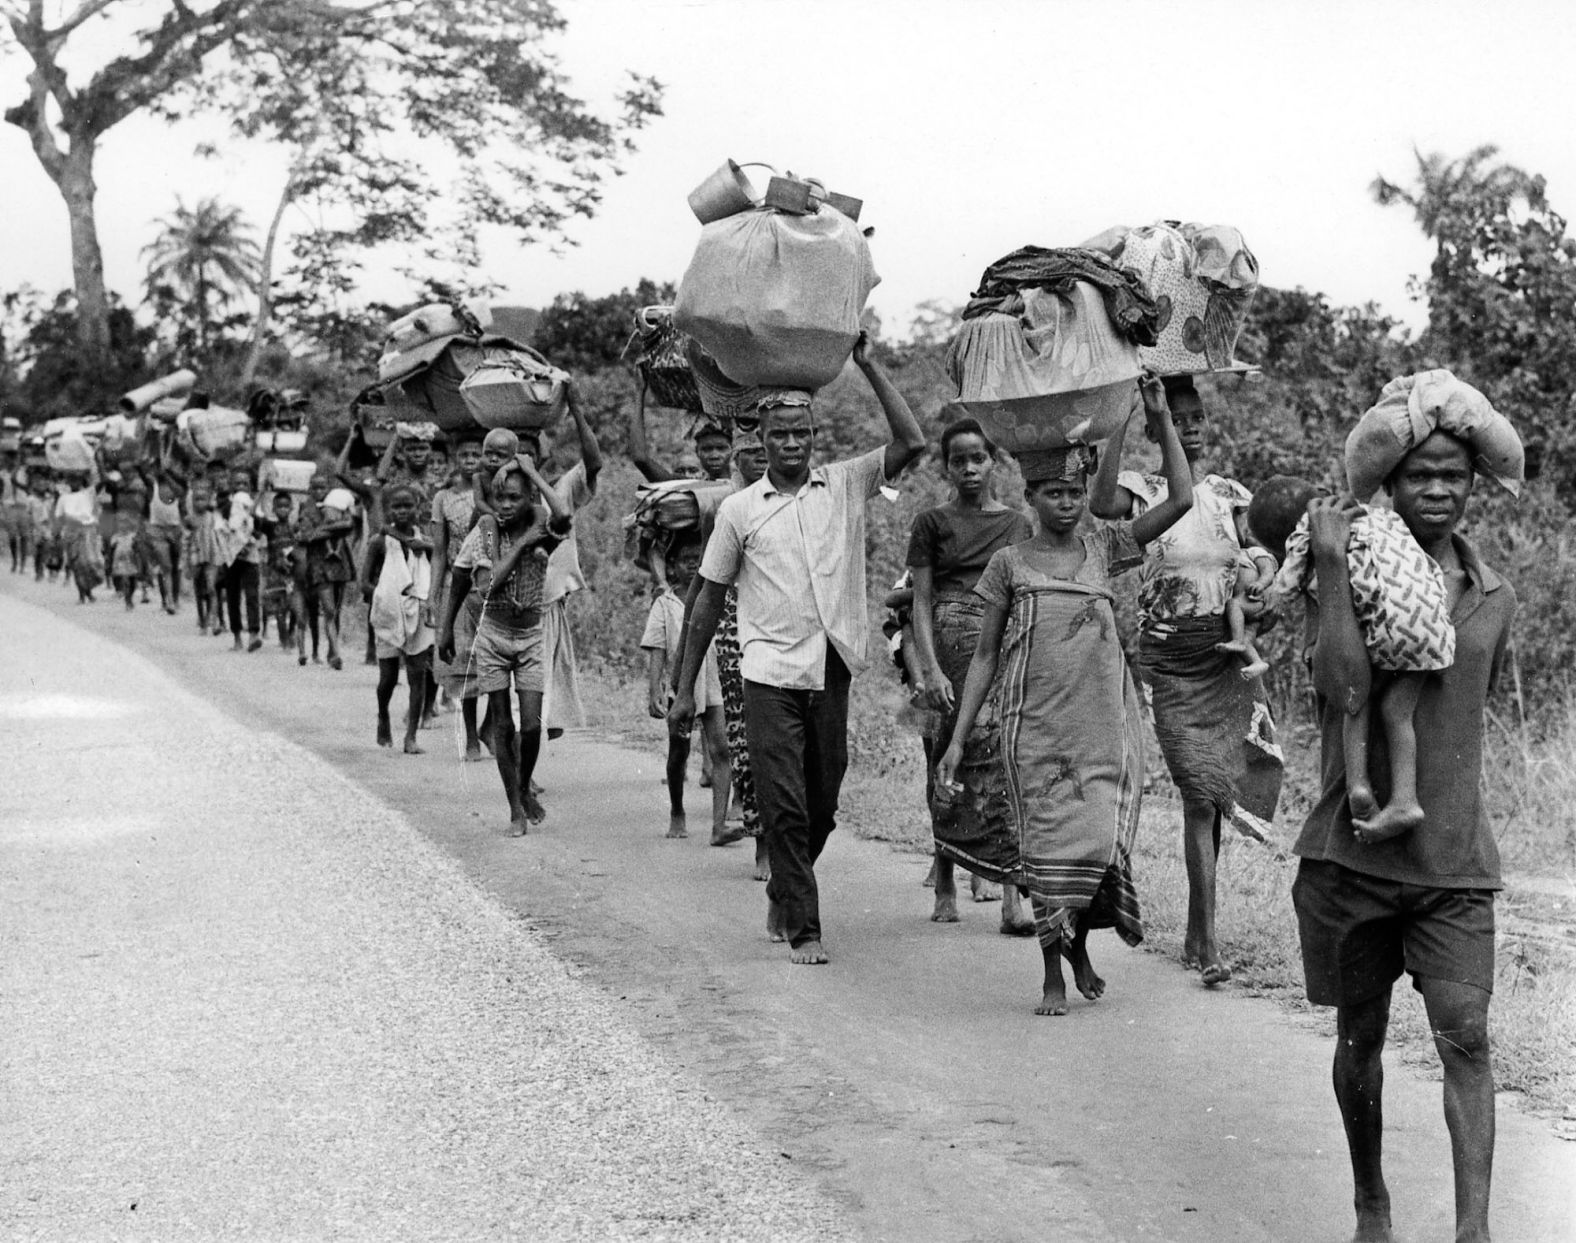 Refugees flee the fighting in July 1968. Estimates of the number of dead from fighting, disease and starvation during the 30-month civil war are estimated at between <a href="https://www.cnn.com/2020/01/15/africa/biafra-nigeria-civil-war/index.html" target="_blank">1 and 3 million</a>.